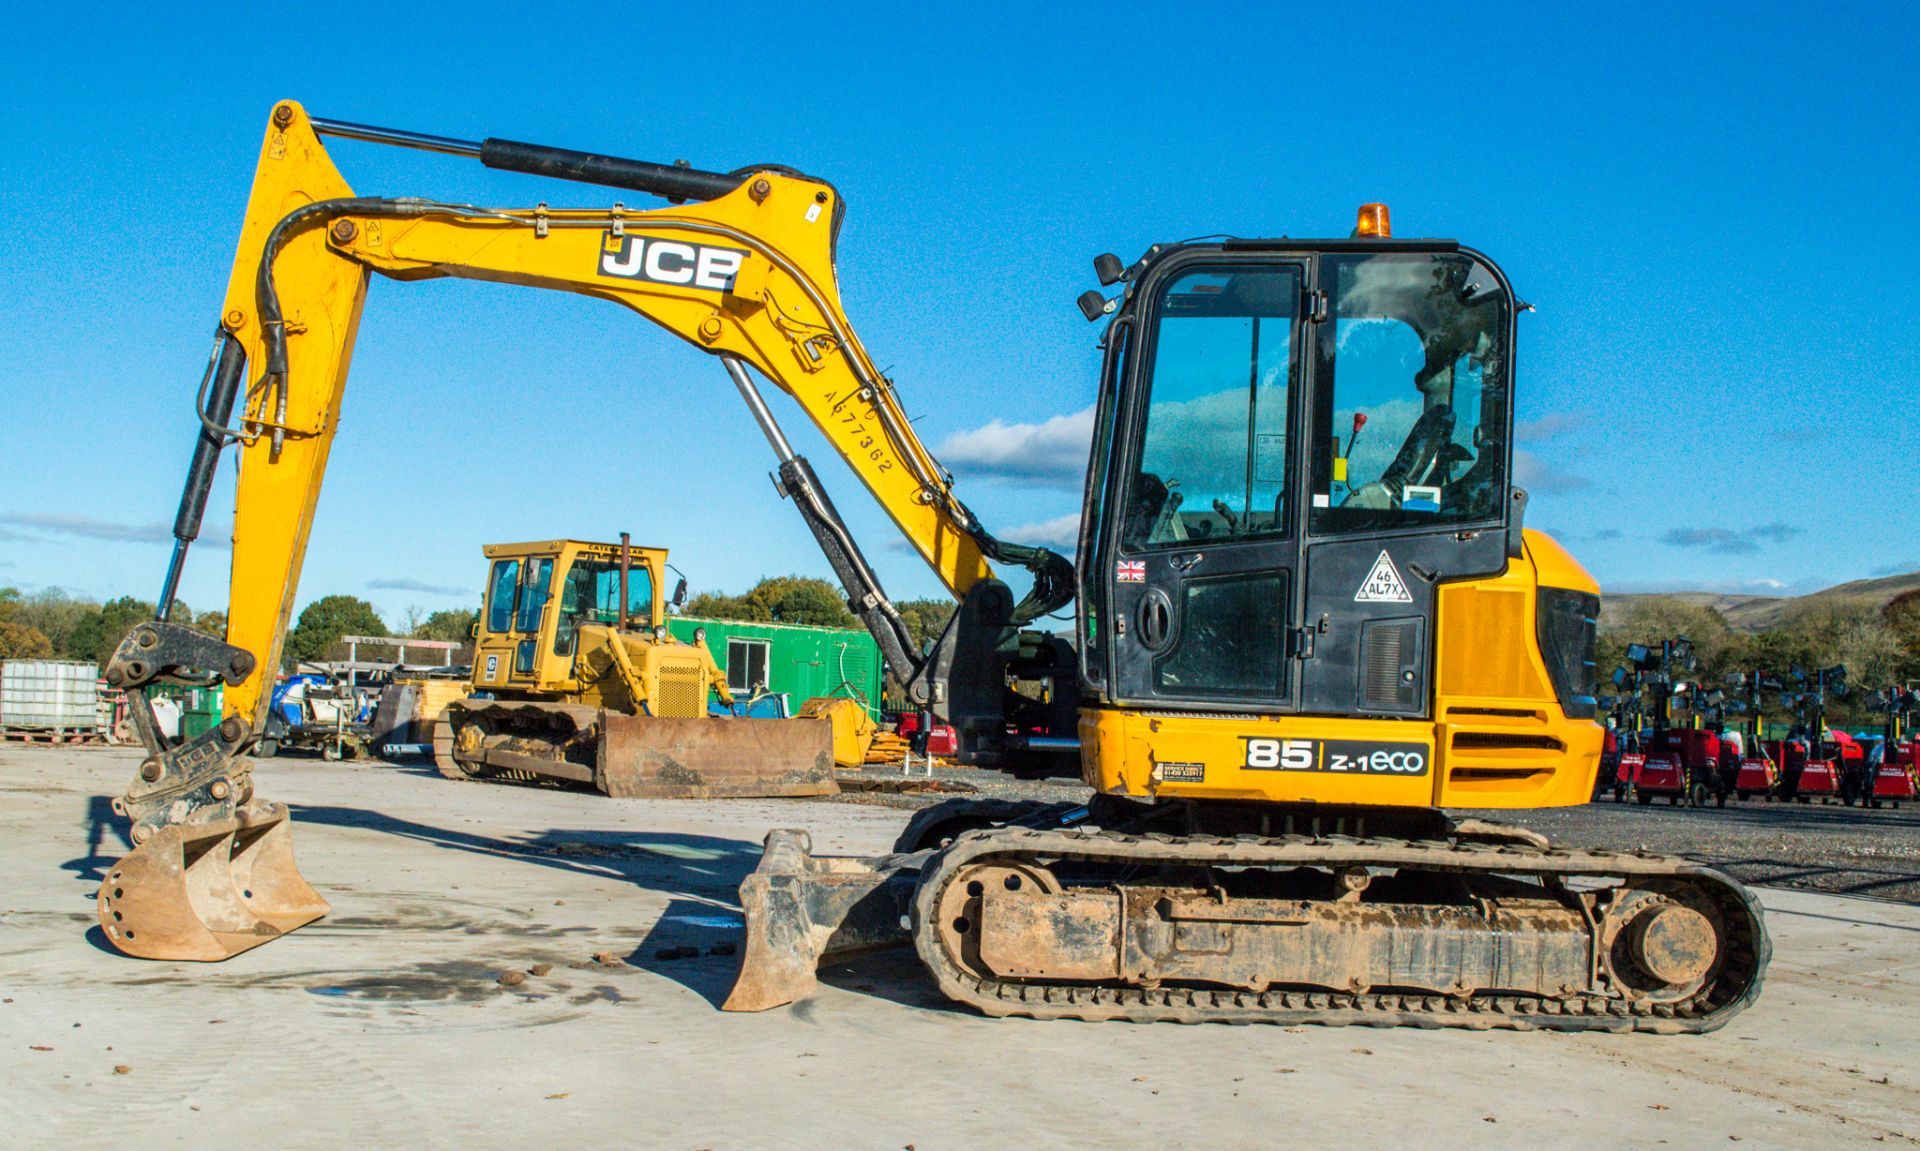 JCB 85 Z-1 ECO 8.5 tonne rubber tracked excavator Year: 2015 S/N: 22249019 Recorded Hours: 3956 - Image 7 of 18